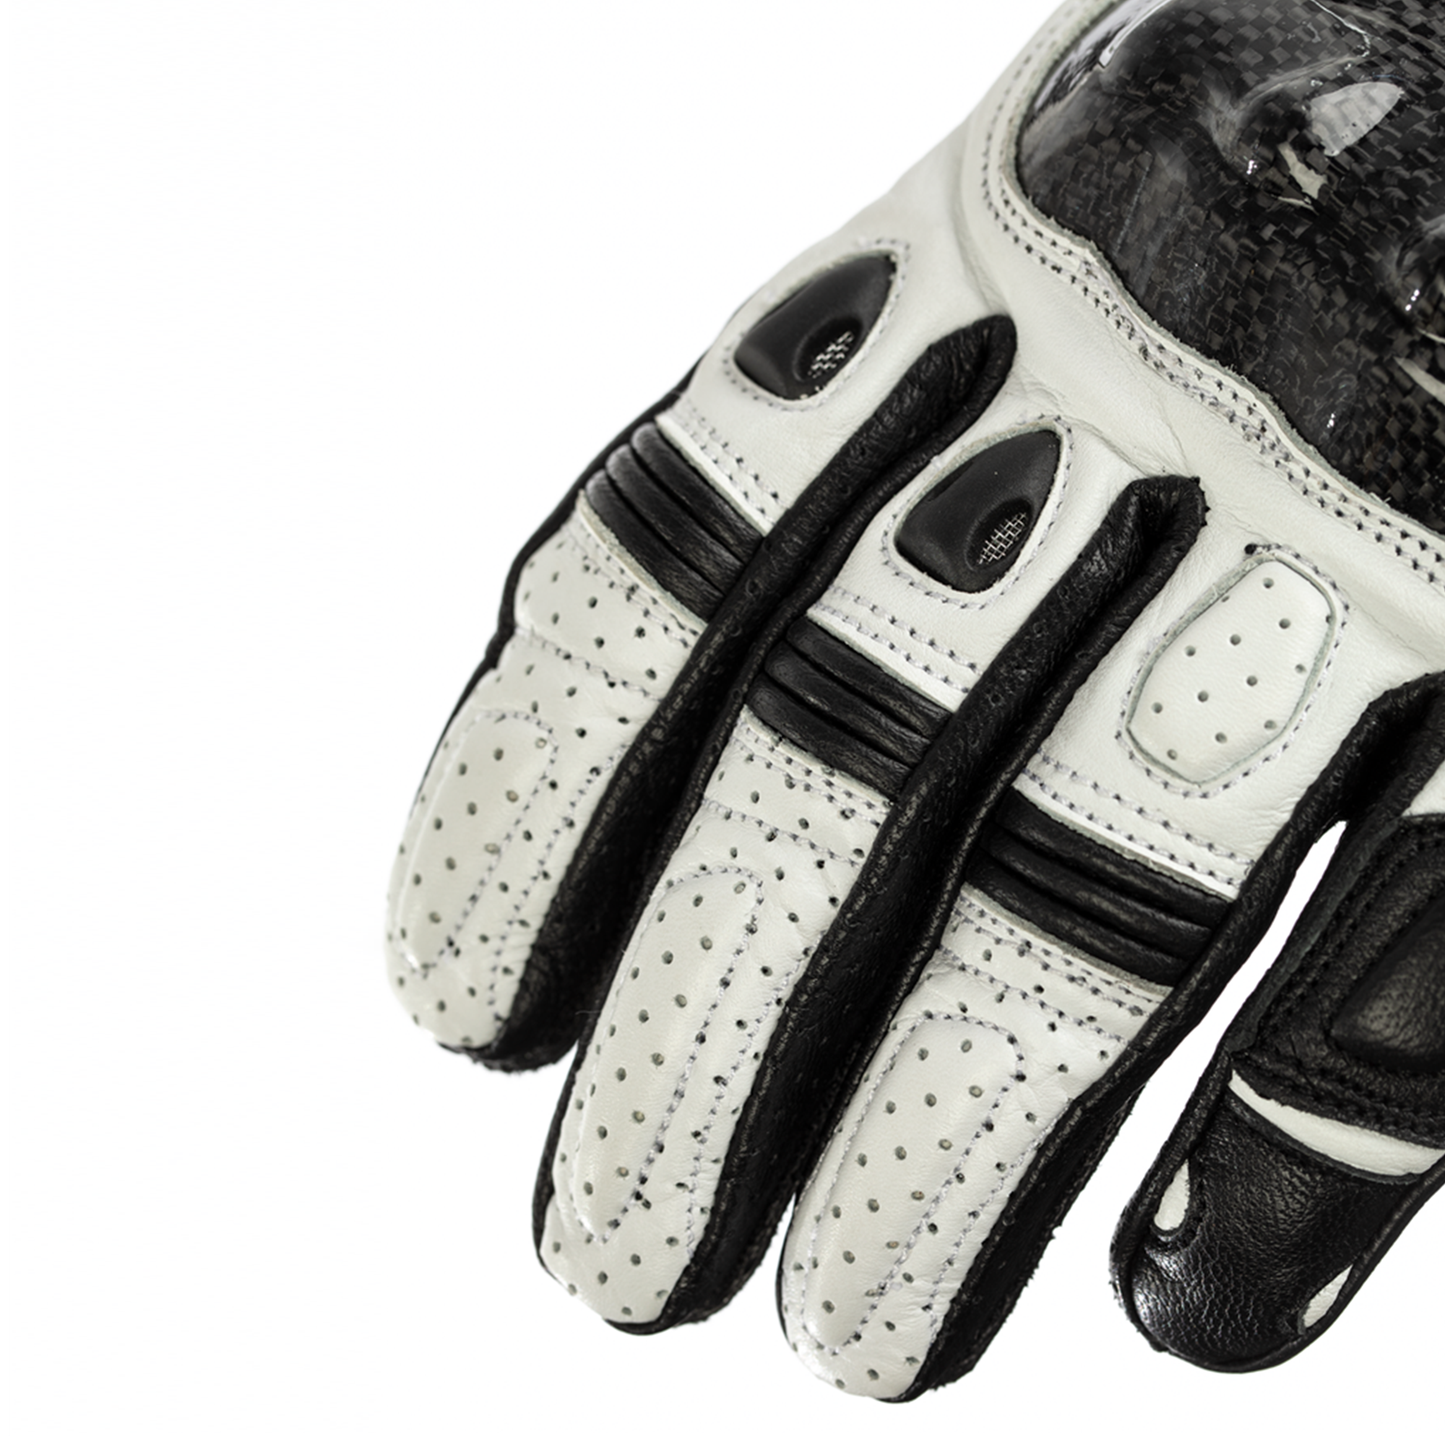 RST Stunt 3 III Ladies Leather Riding Gloves - CE Approved - White